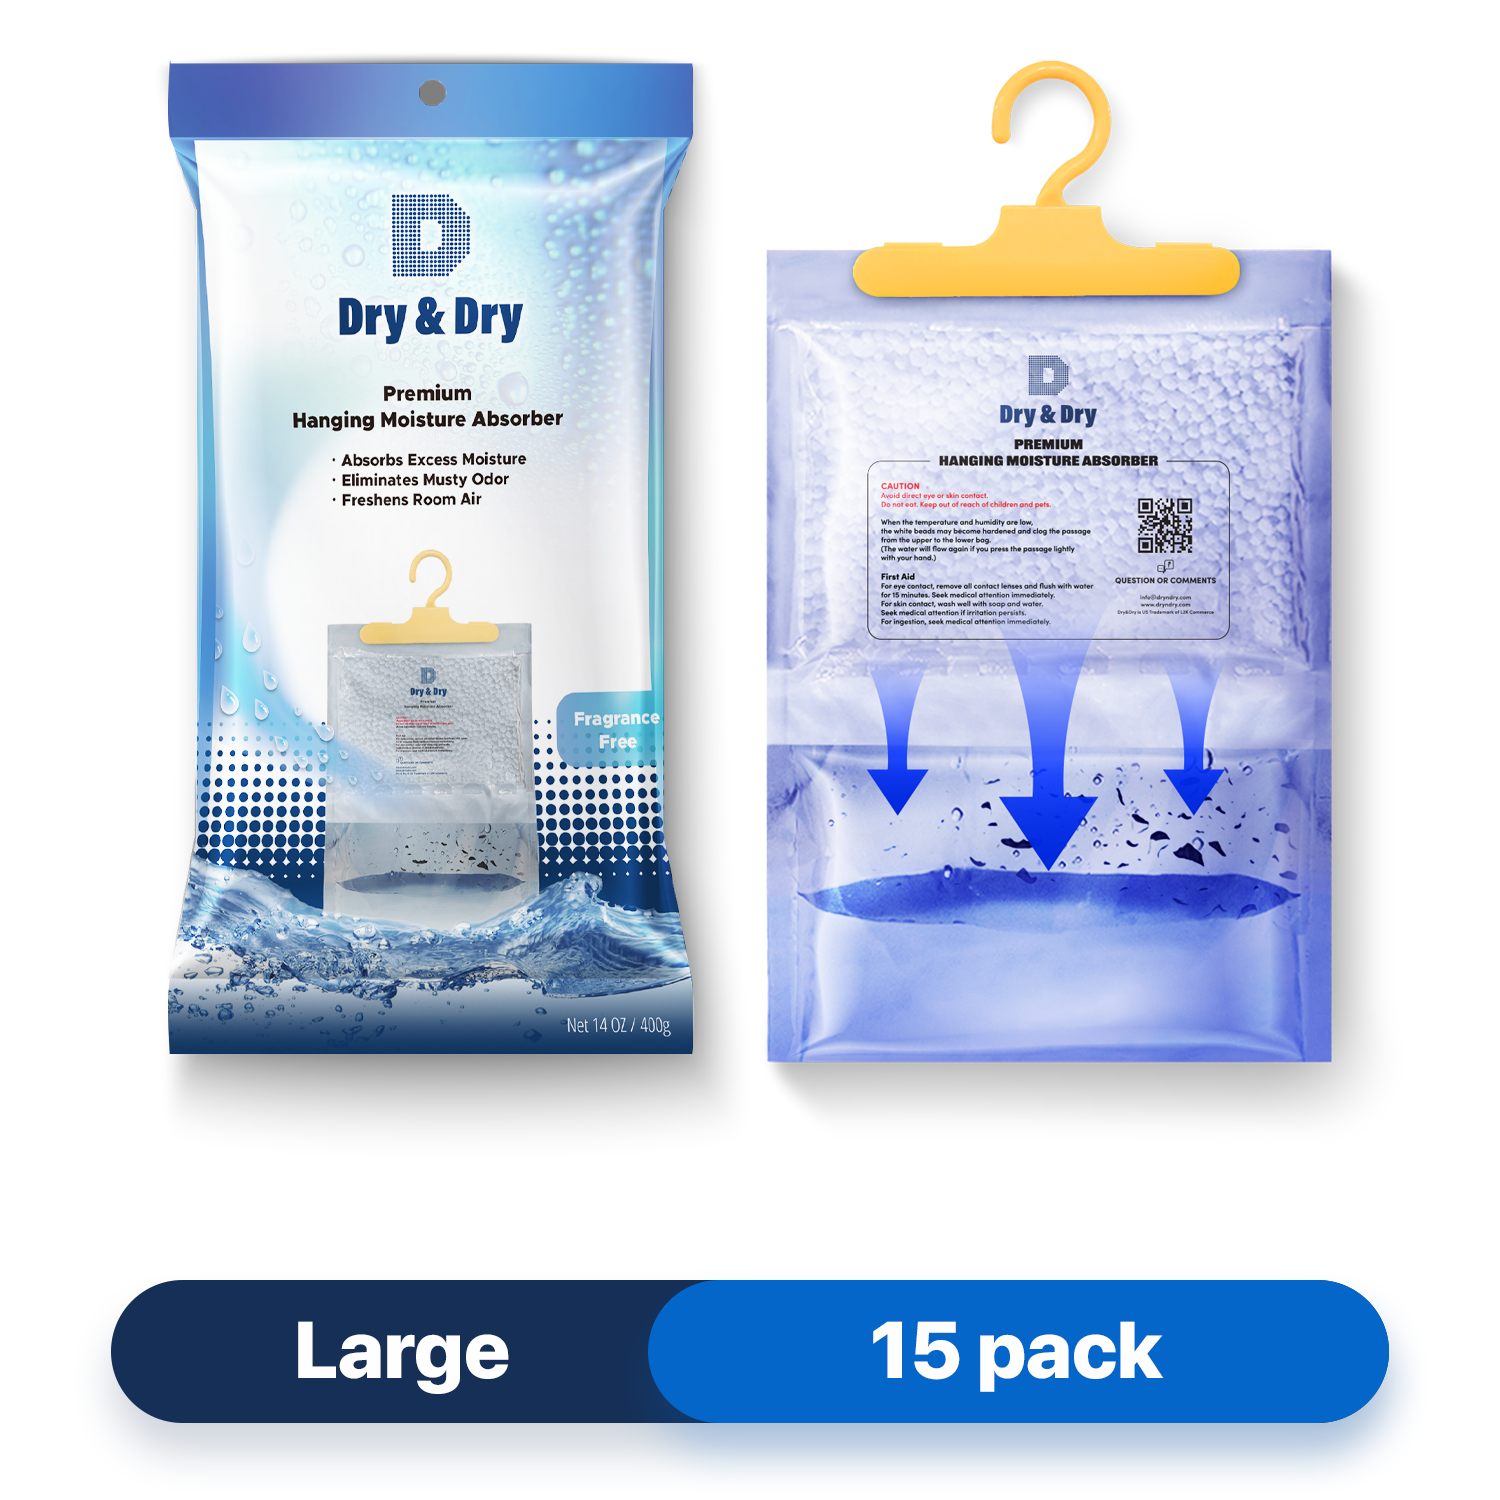 [15 pack] [Net 14.1 oz/Pack] “Dry & Dry” Premium Hanging Moisture Absorber to Control Excess Moisture for Basements, Bathrooms, Laundry Rooms, and Enclosed Spaces